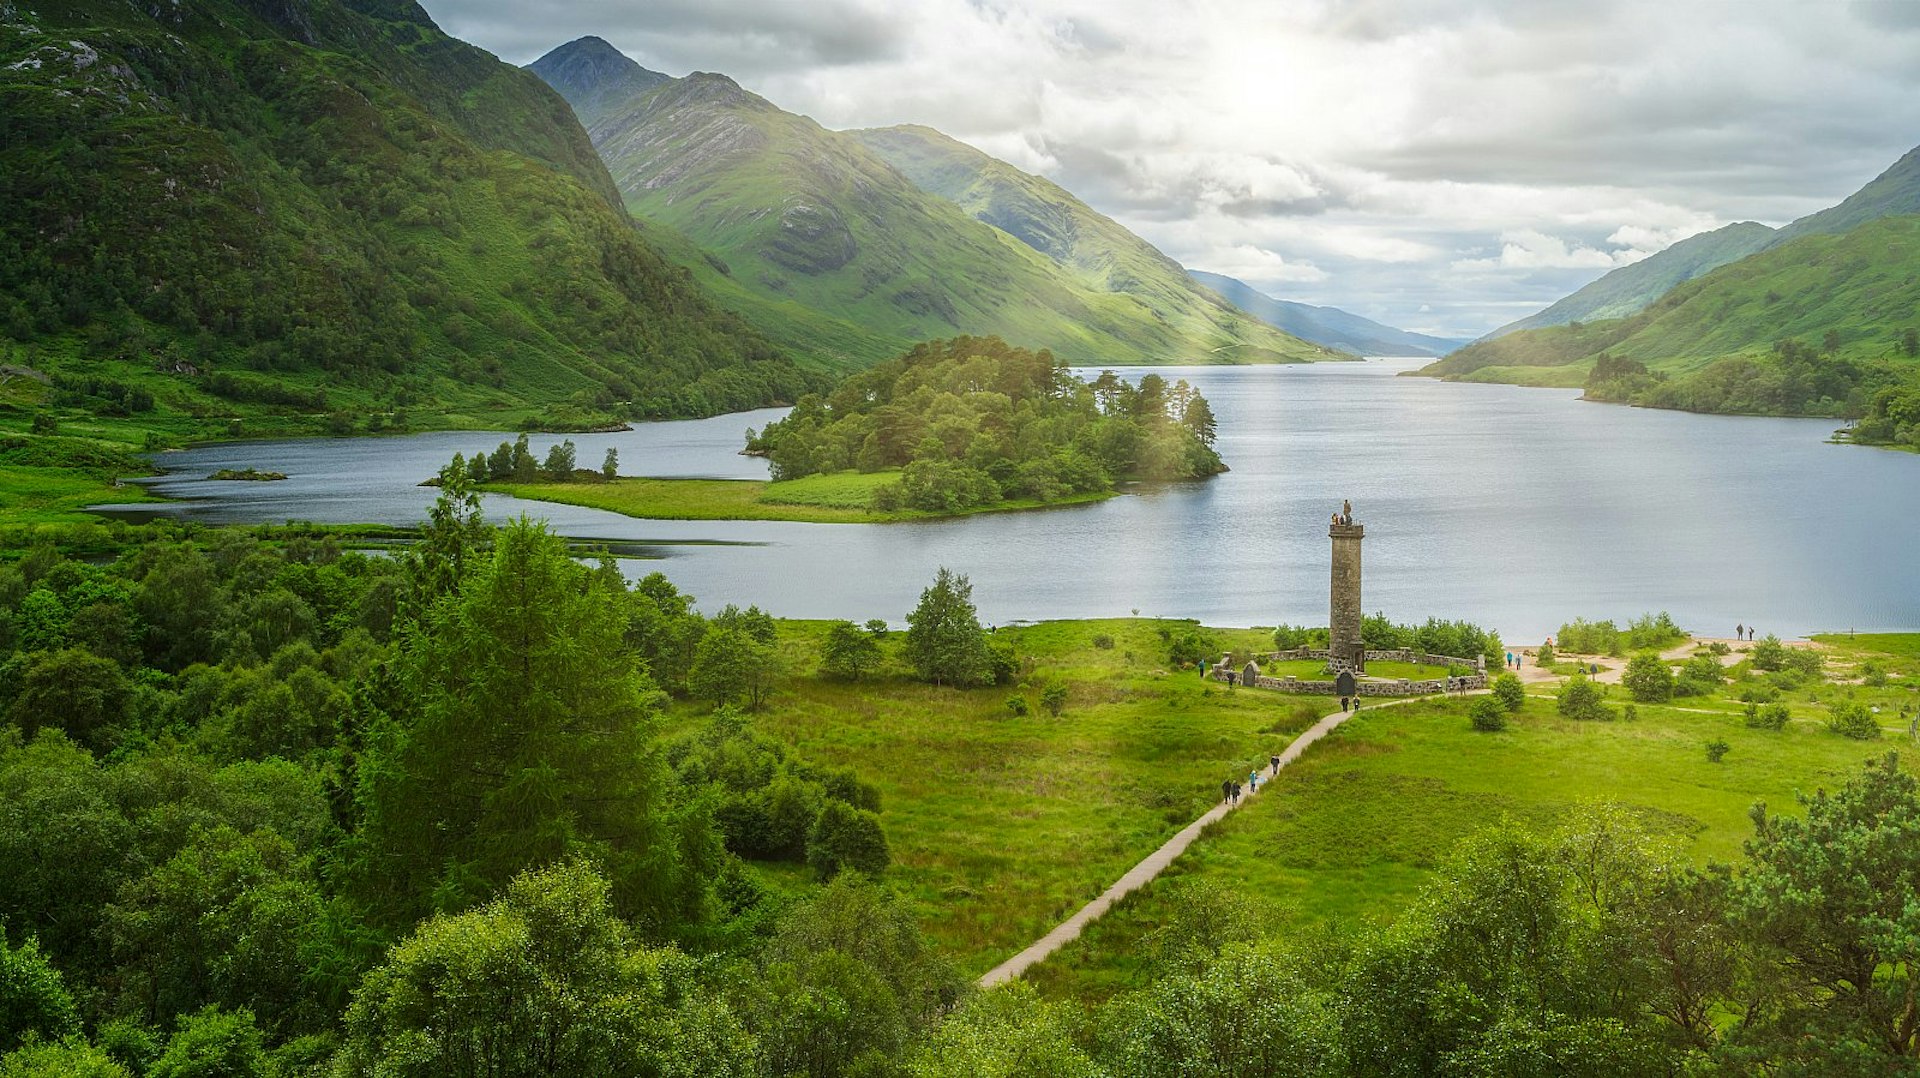 Glenfinnan Monument, amid greenery and mountains at the head of Loch Shiel in Inverness-shire, Scotland.